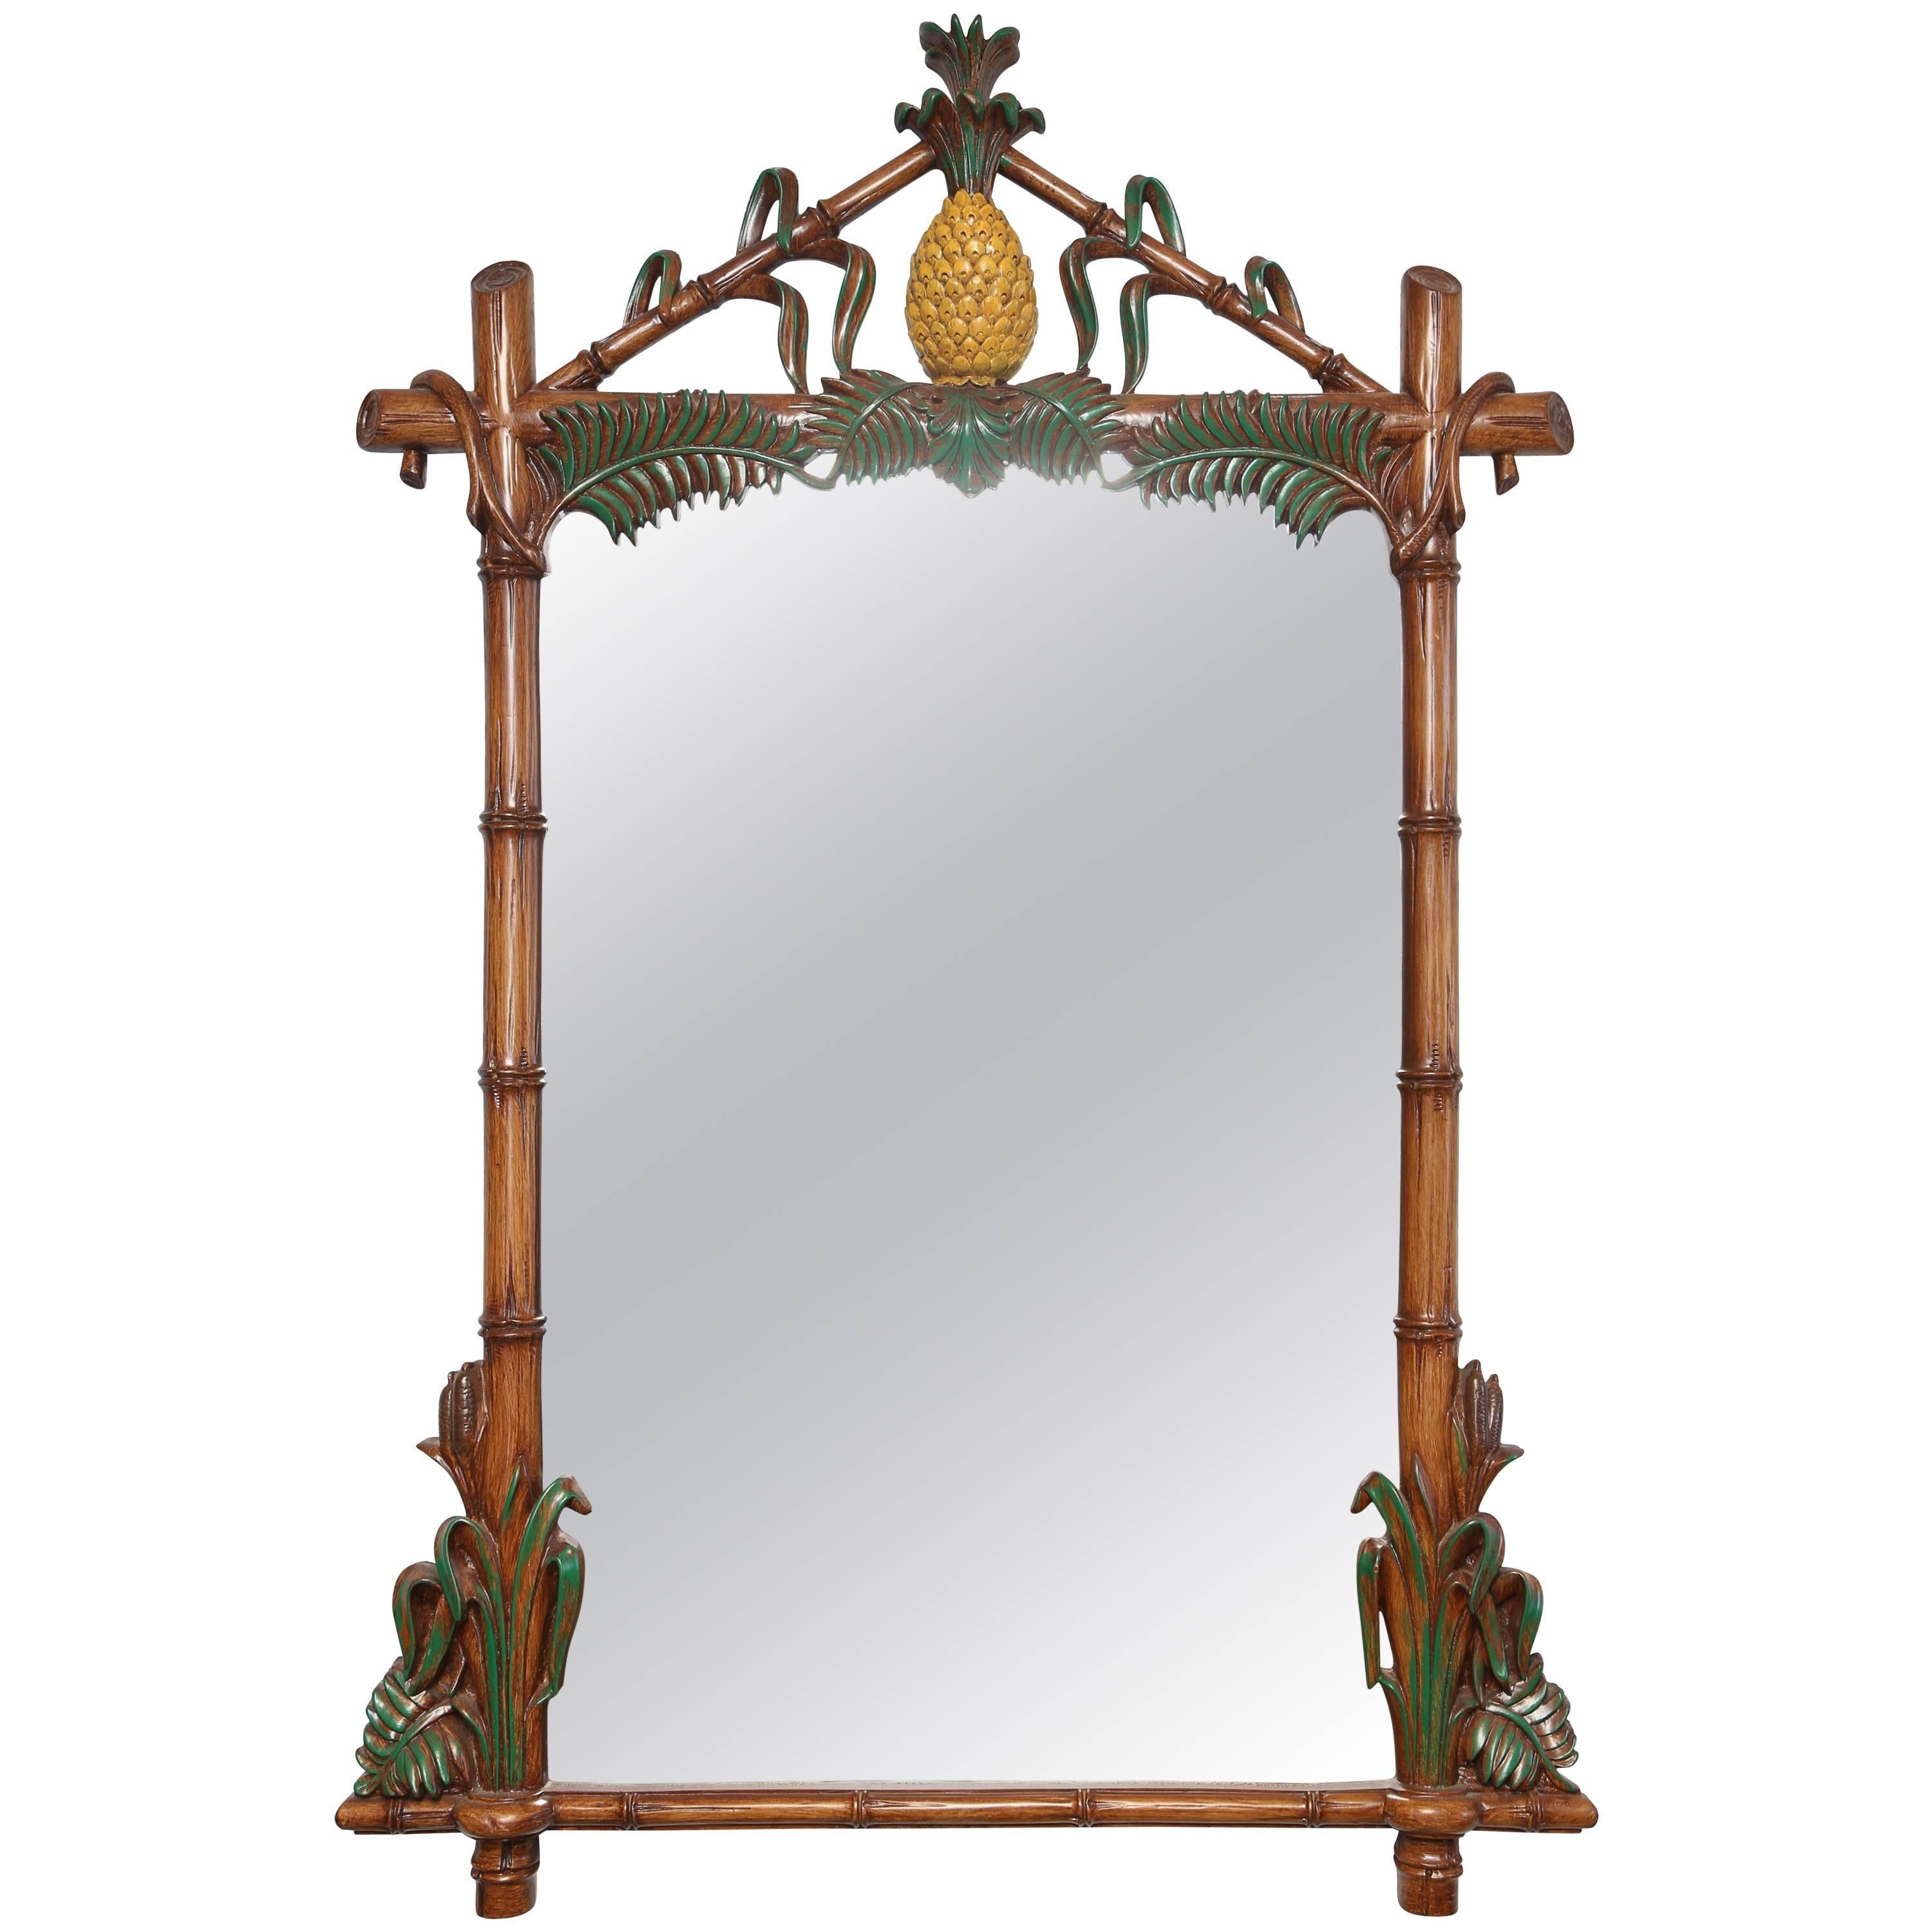 Superb Faux Bamboo Composition Mirror with Pineapple Finial